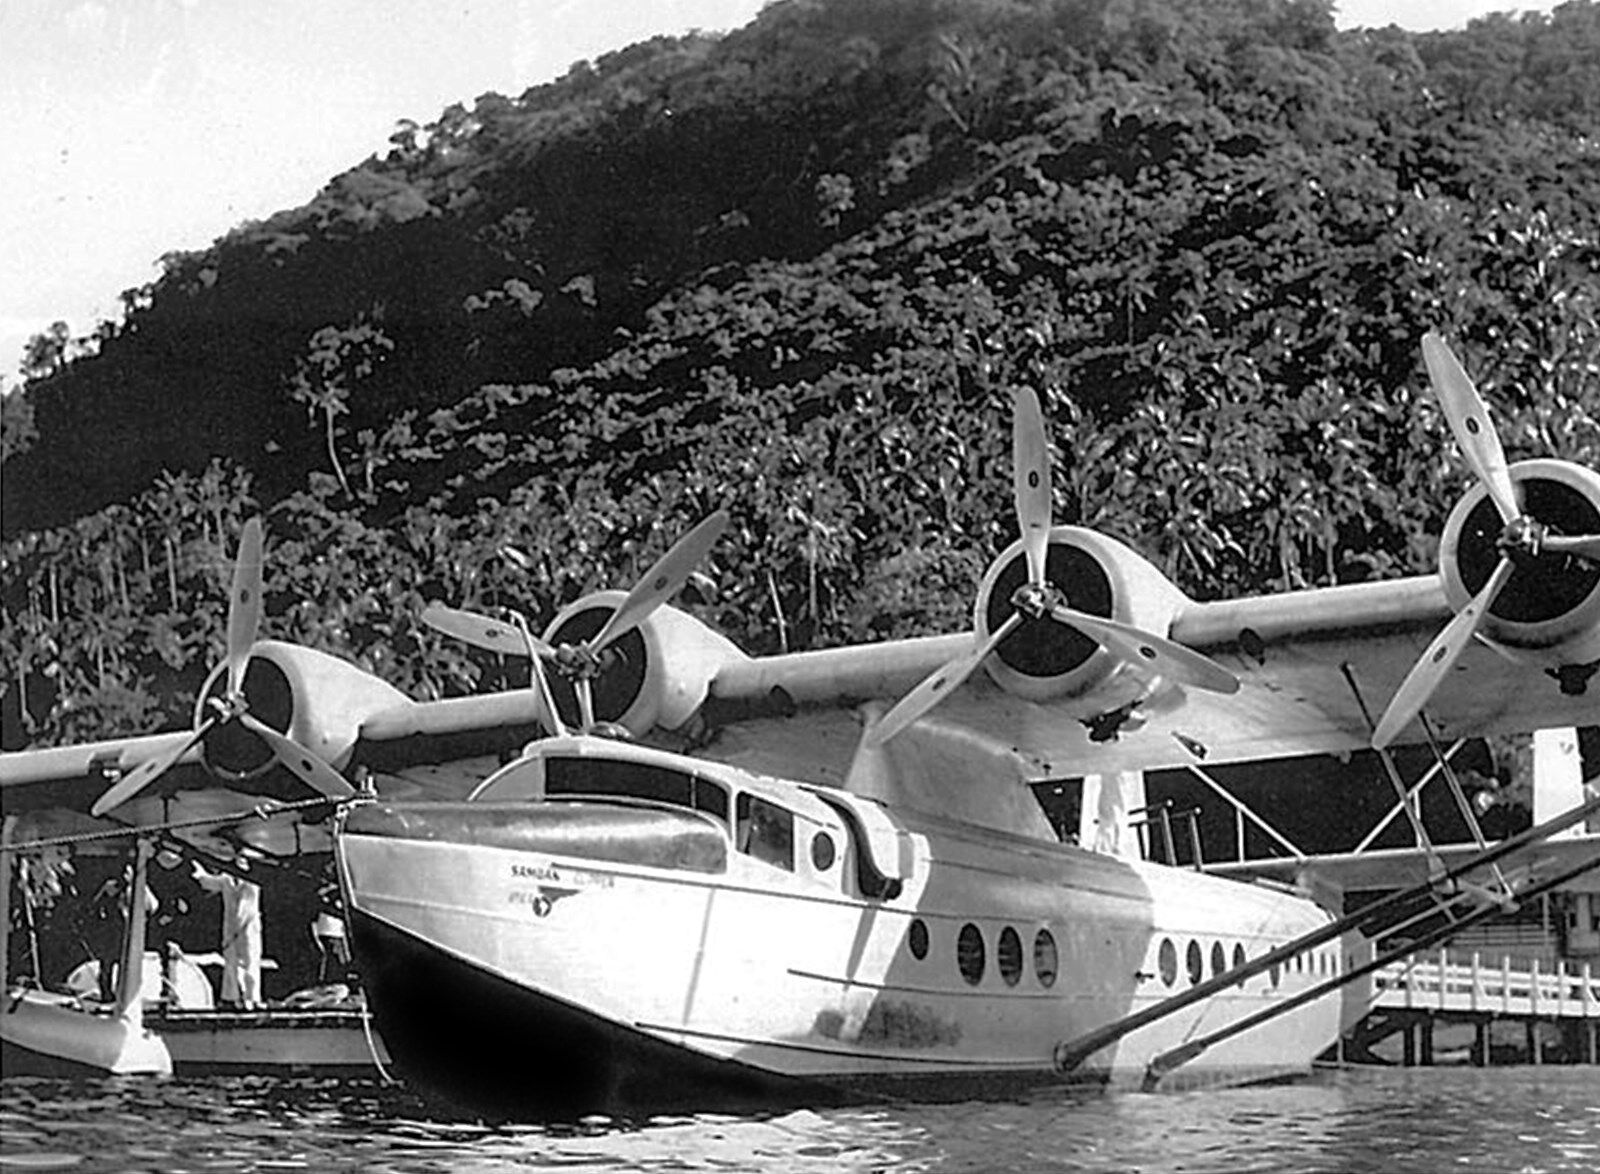  Pan Am Clipper photo Sikorsky S-42 Airplane Flying Boat 1930s Samoan Clipper   